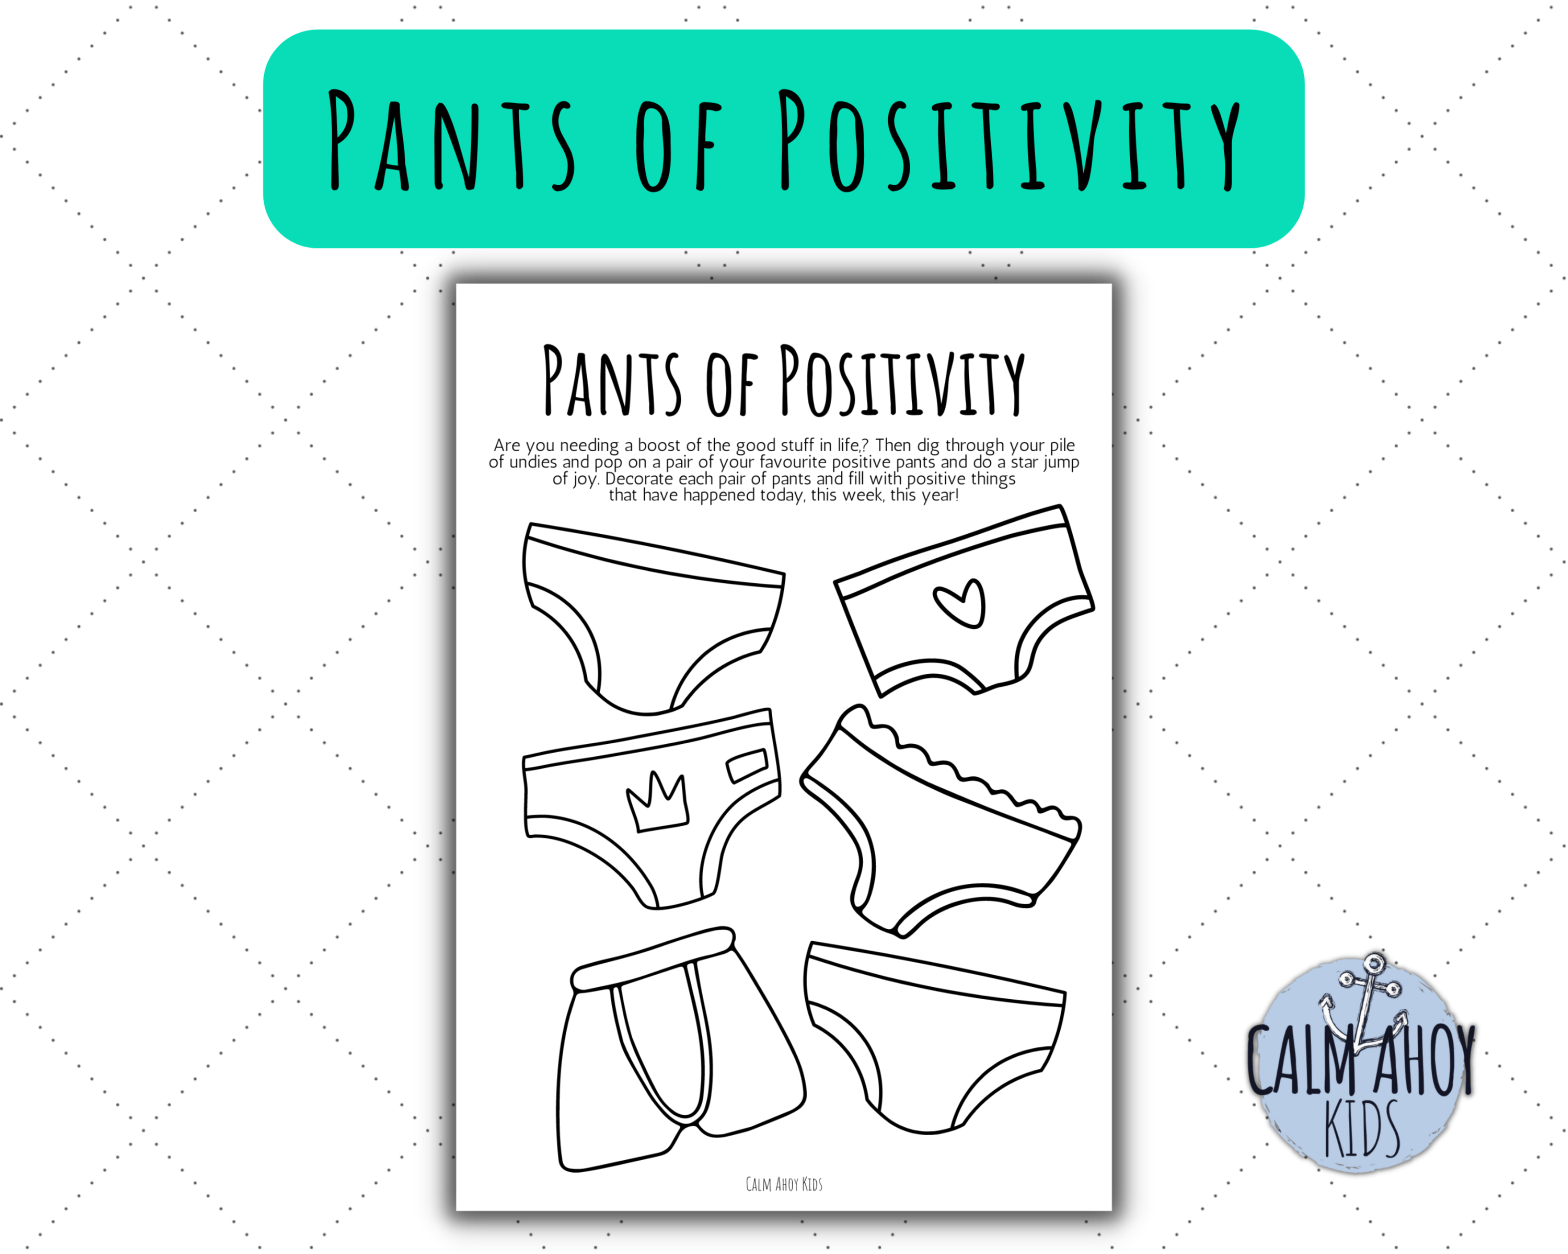 Pants of Positivity Activity for Kids